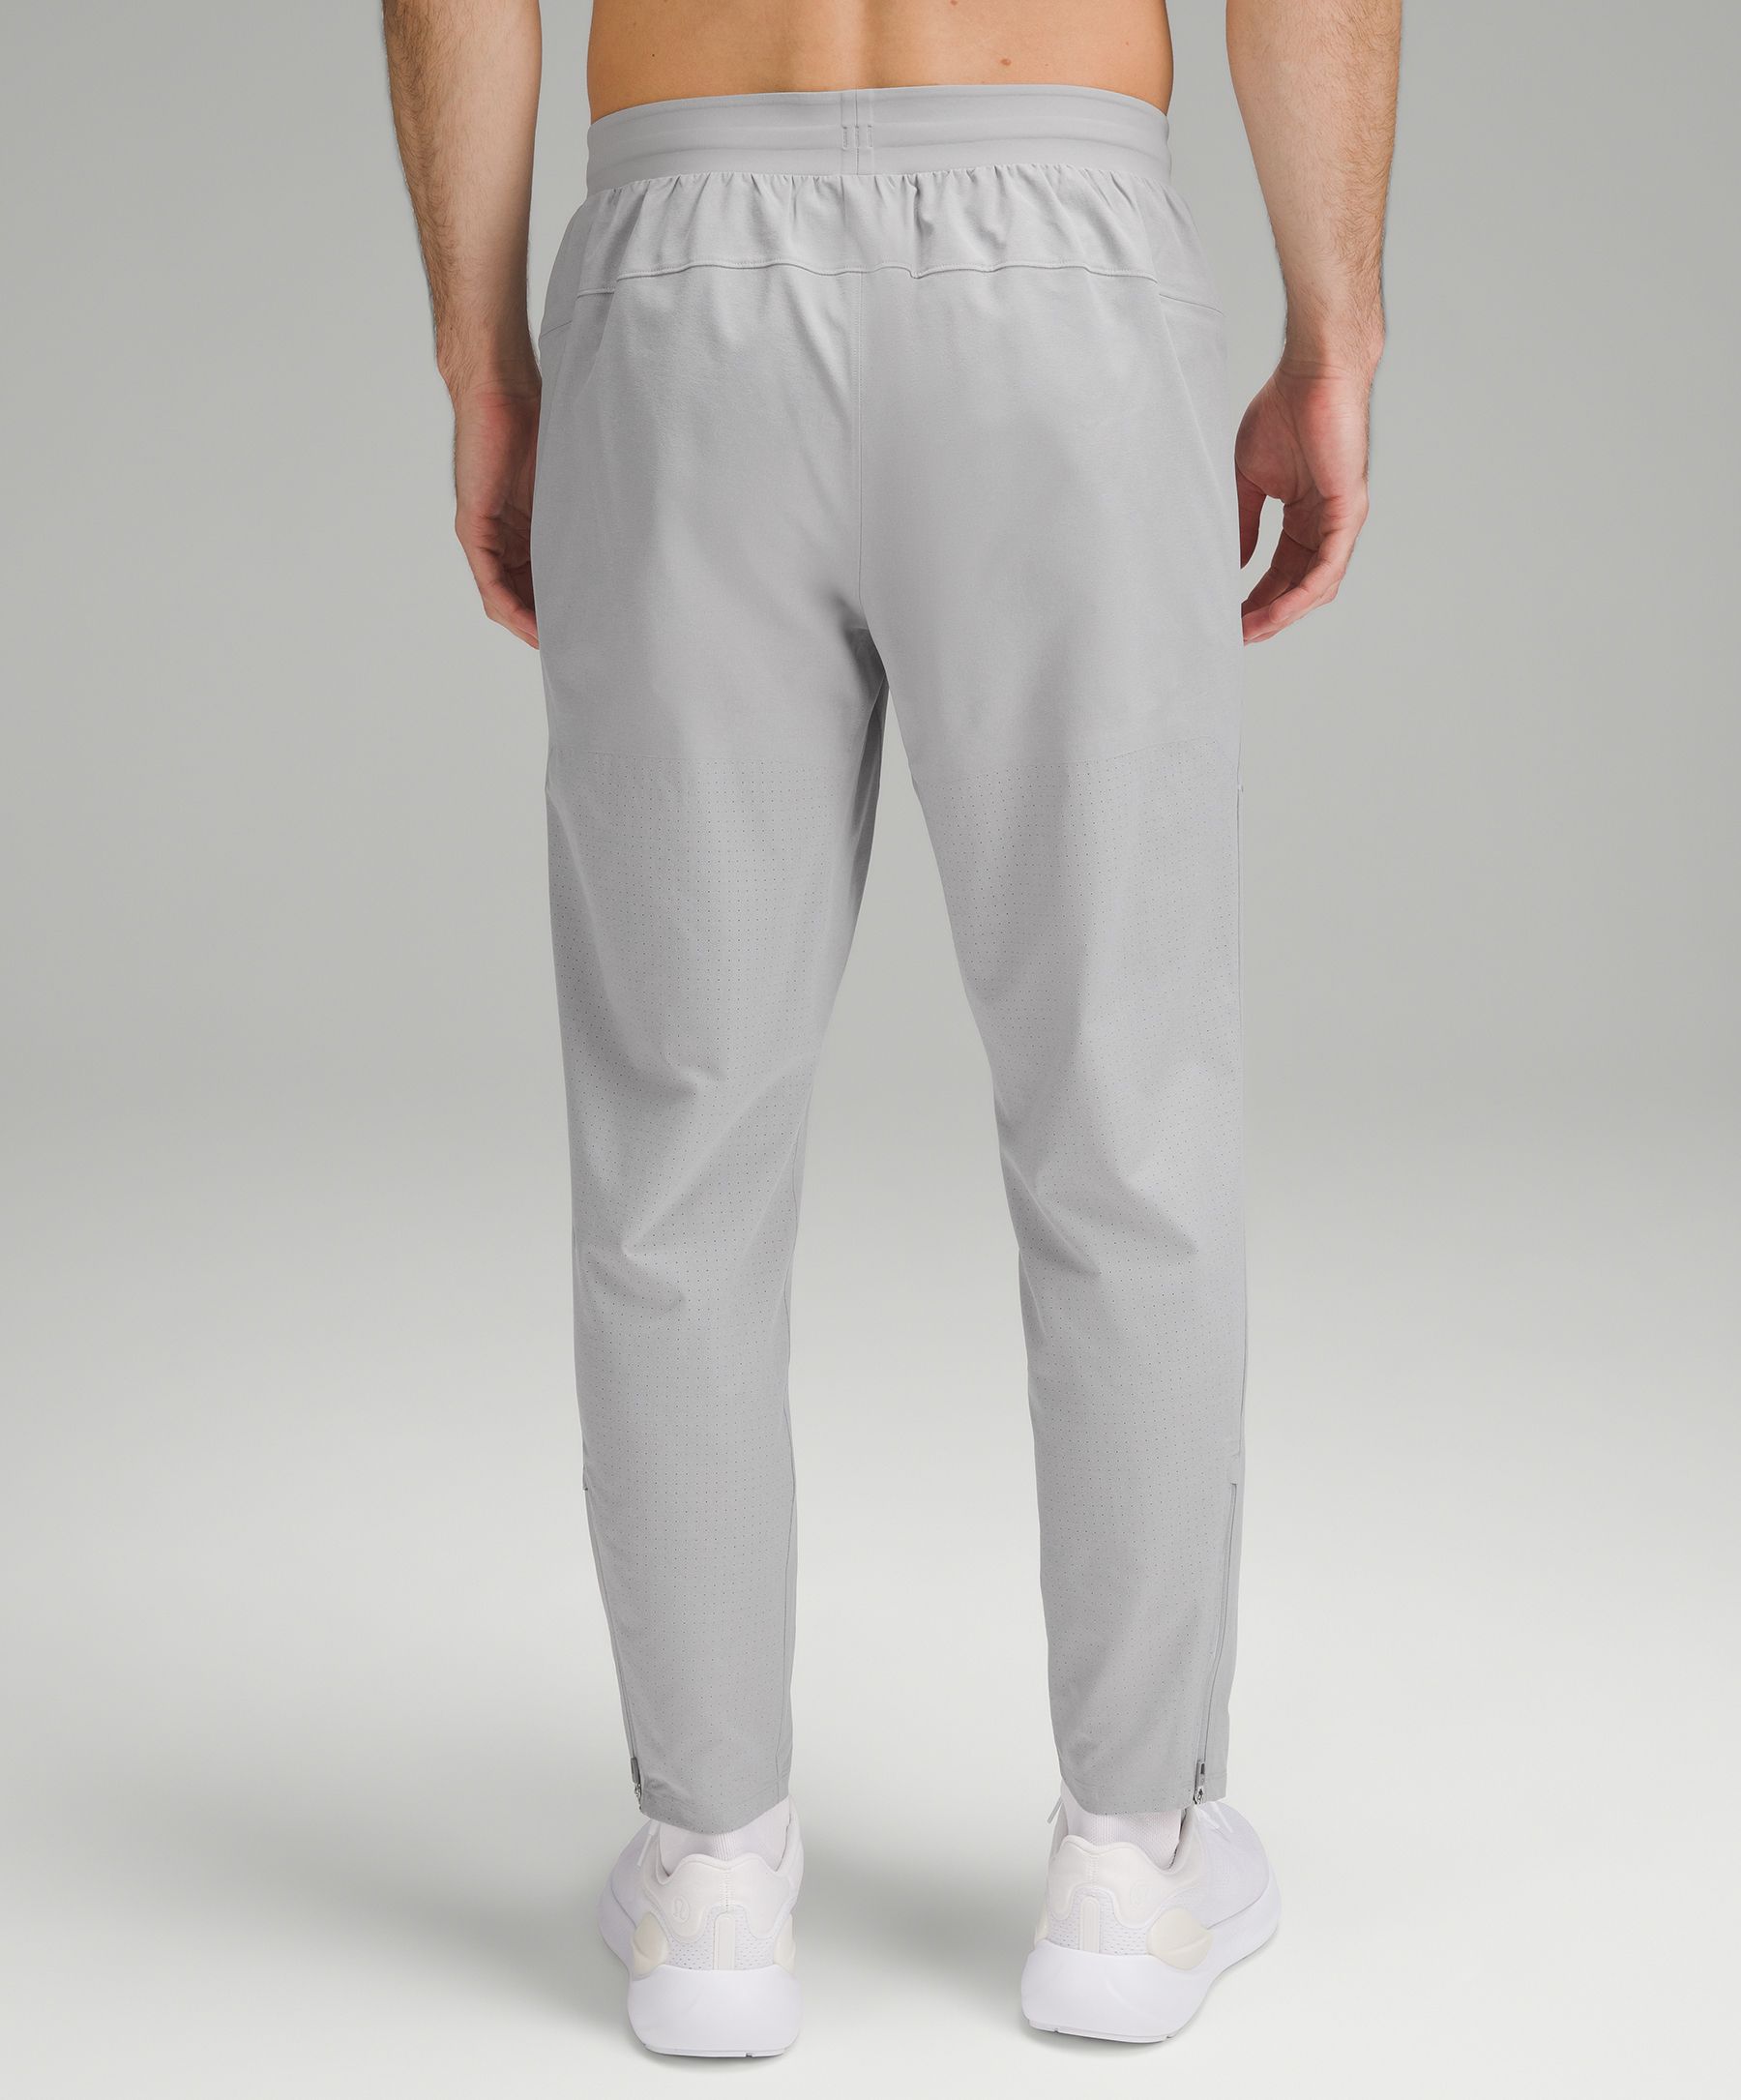 Fast and Free Cold Weather Running Pant 28 | Men's Joggers | lululemon